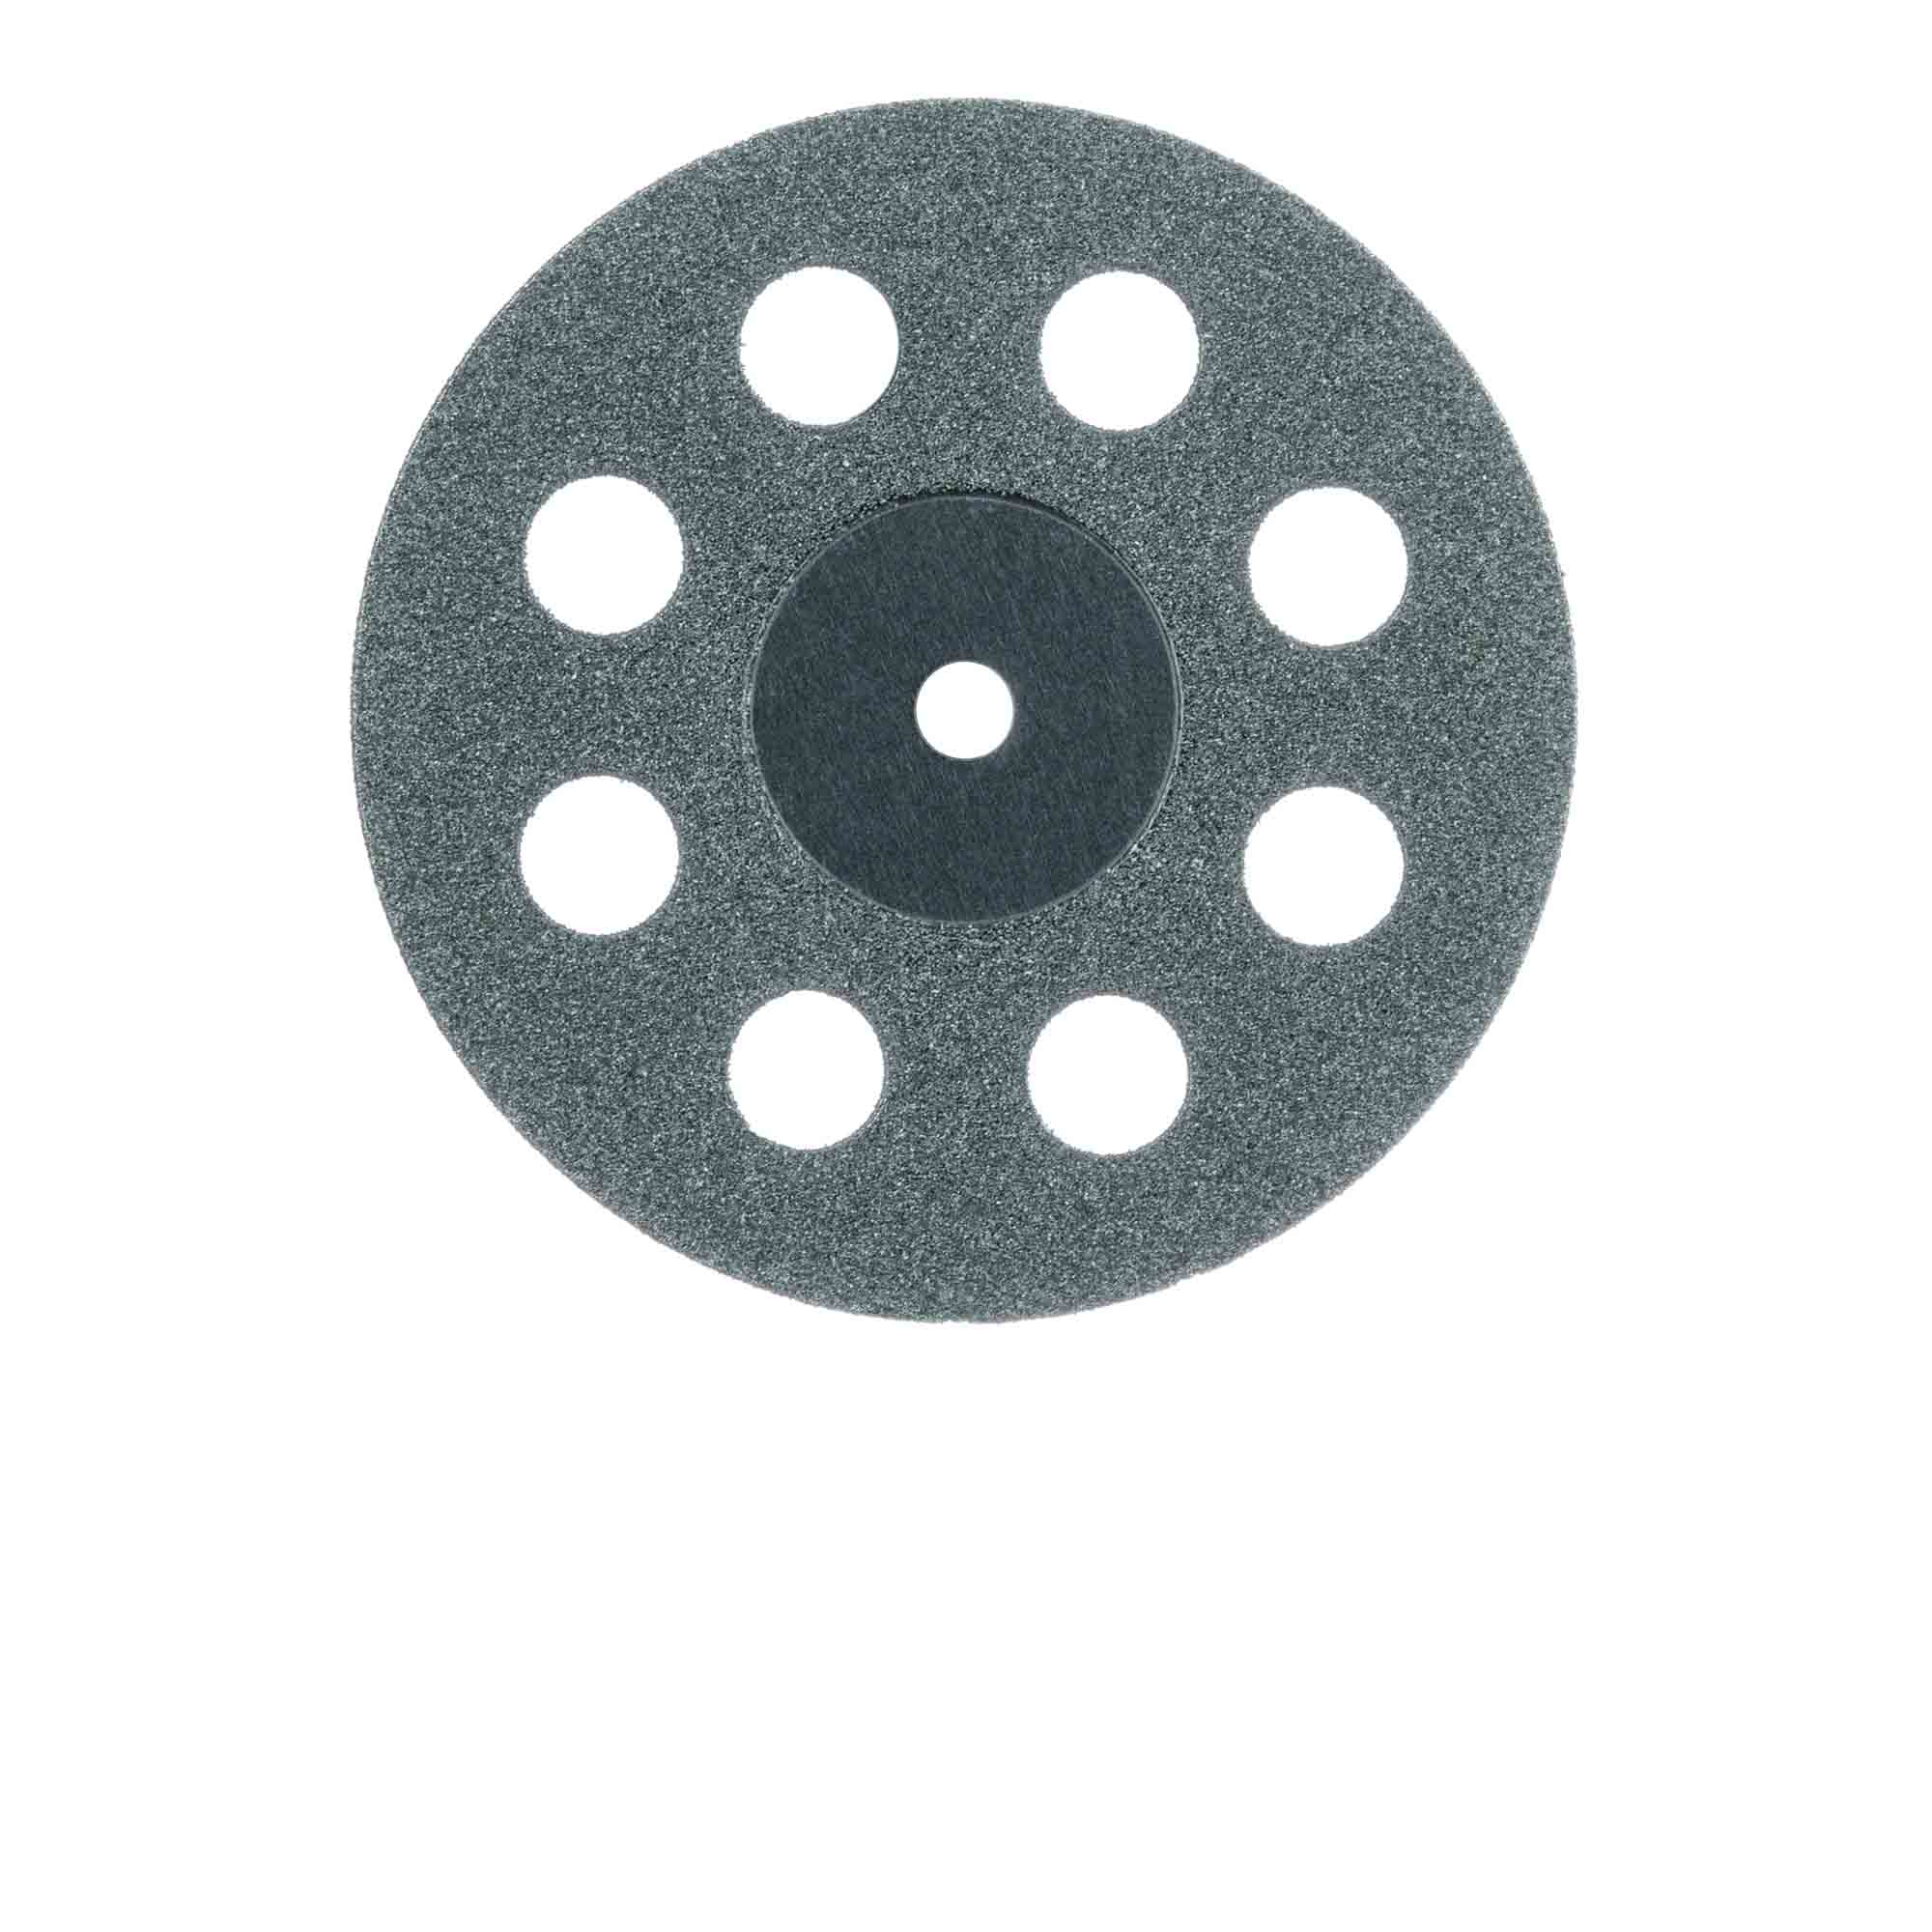 932DF-220-UNM Diamond Bur, Perforated Disc, Double Sided, 0.25mm Thick, 22 mm Ø, Fine, UNM